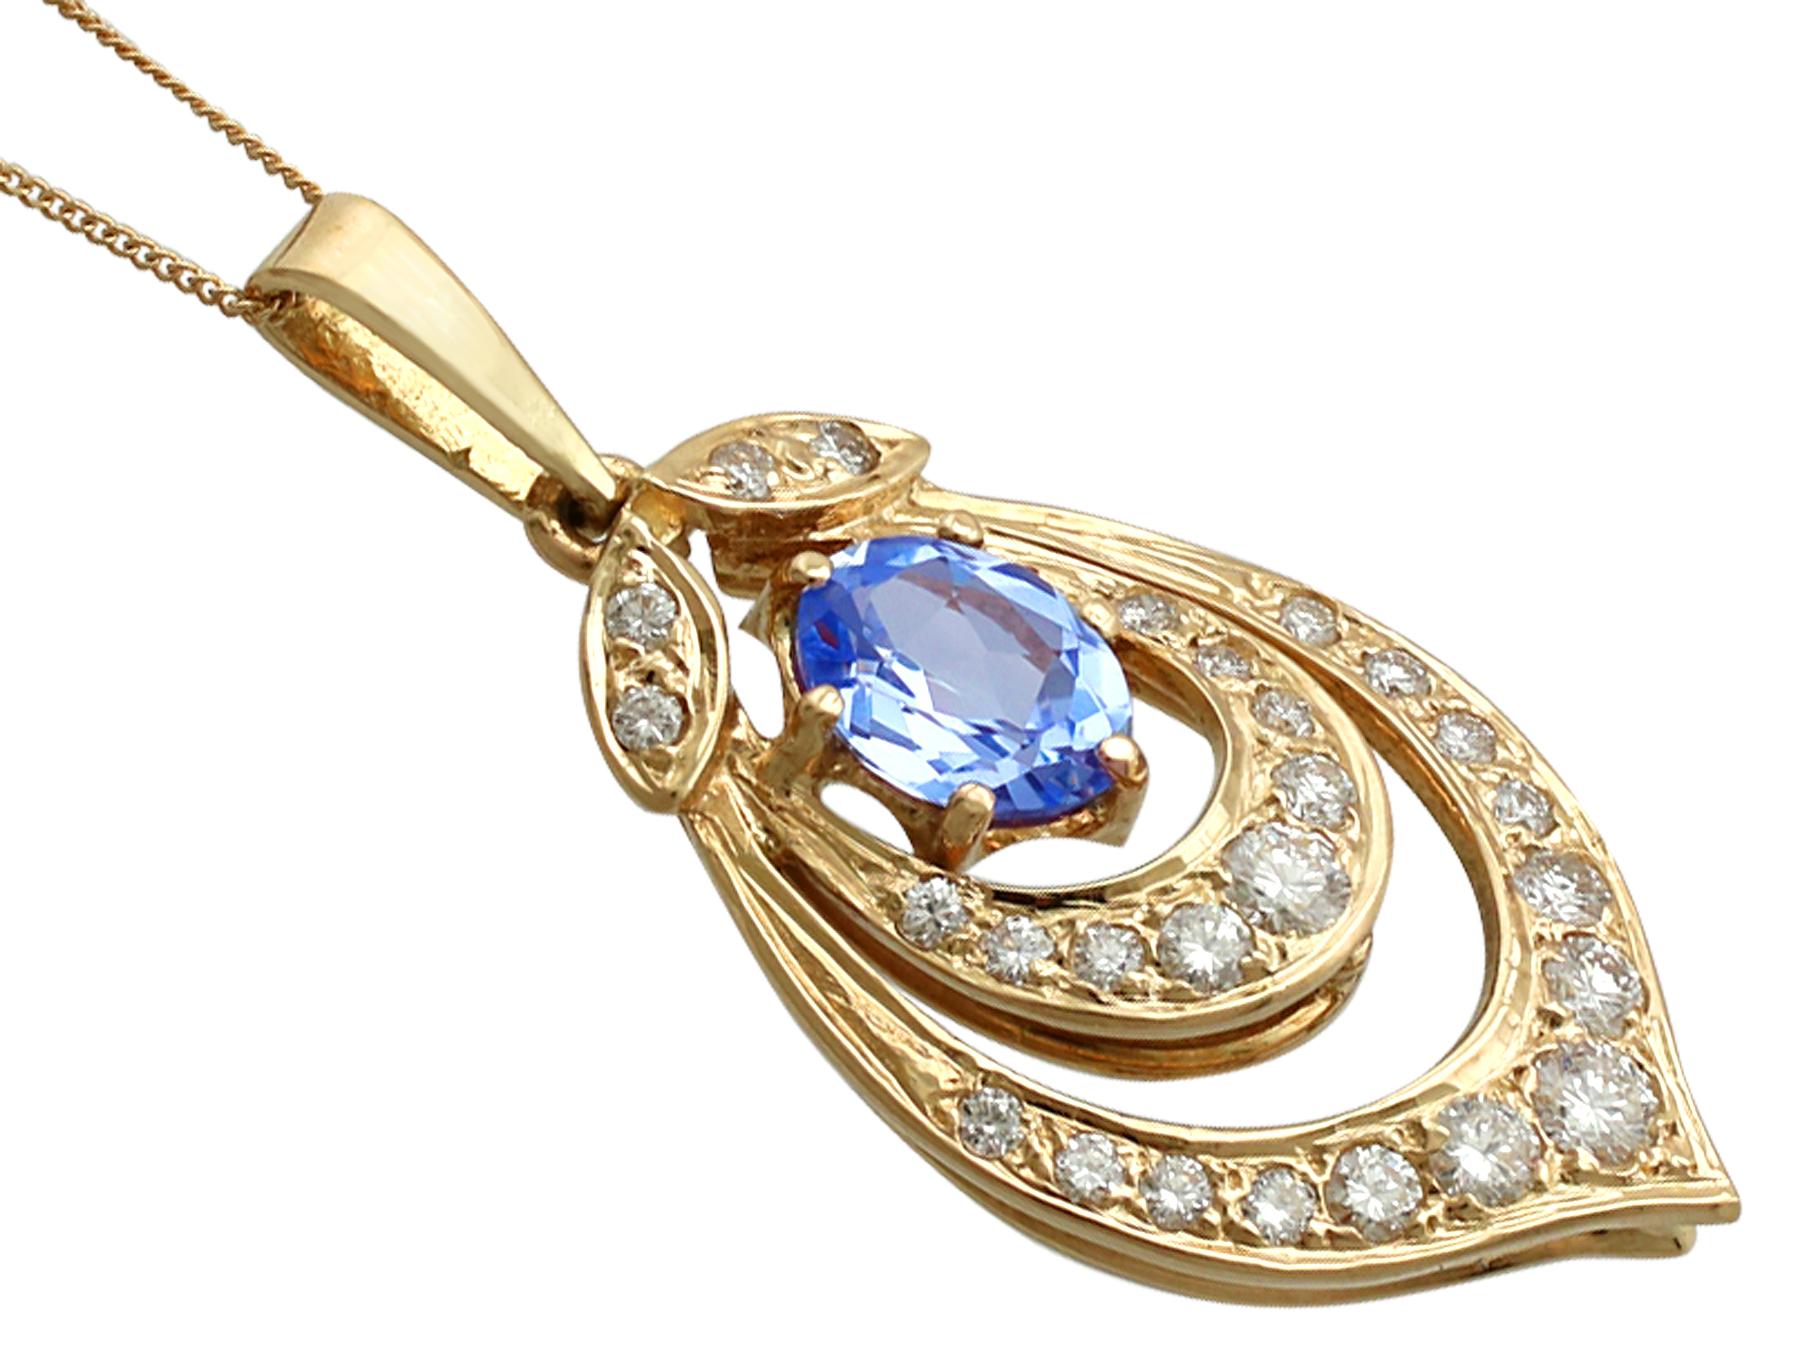 Vintage 1980s 1.10 Carat Oval Cut Aquamarine Diamond Yellow Gold Pendant In Excellent Condition For Sale In Jesmond, Newcastle Upon Tyne